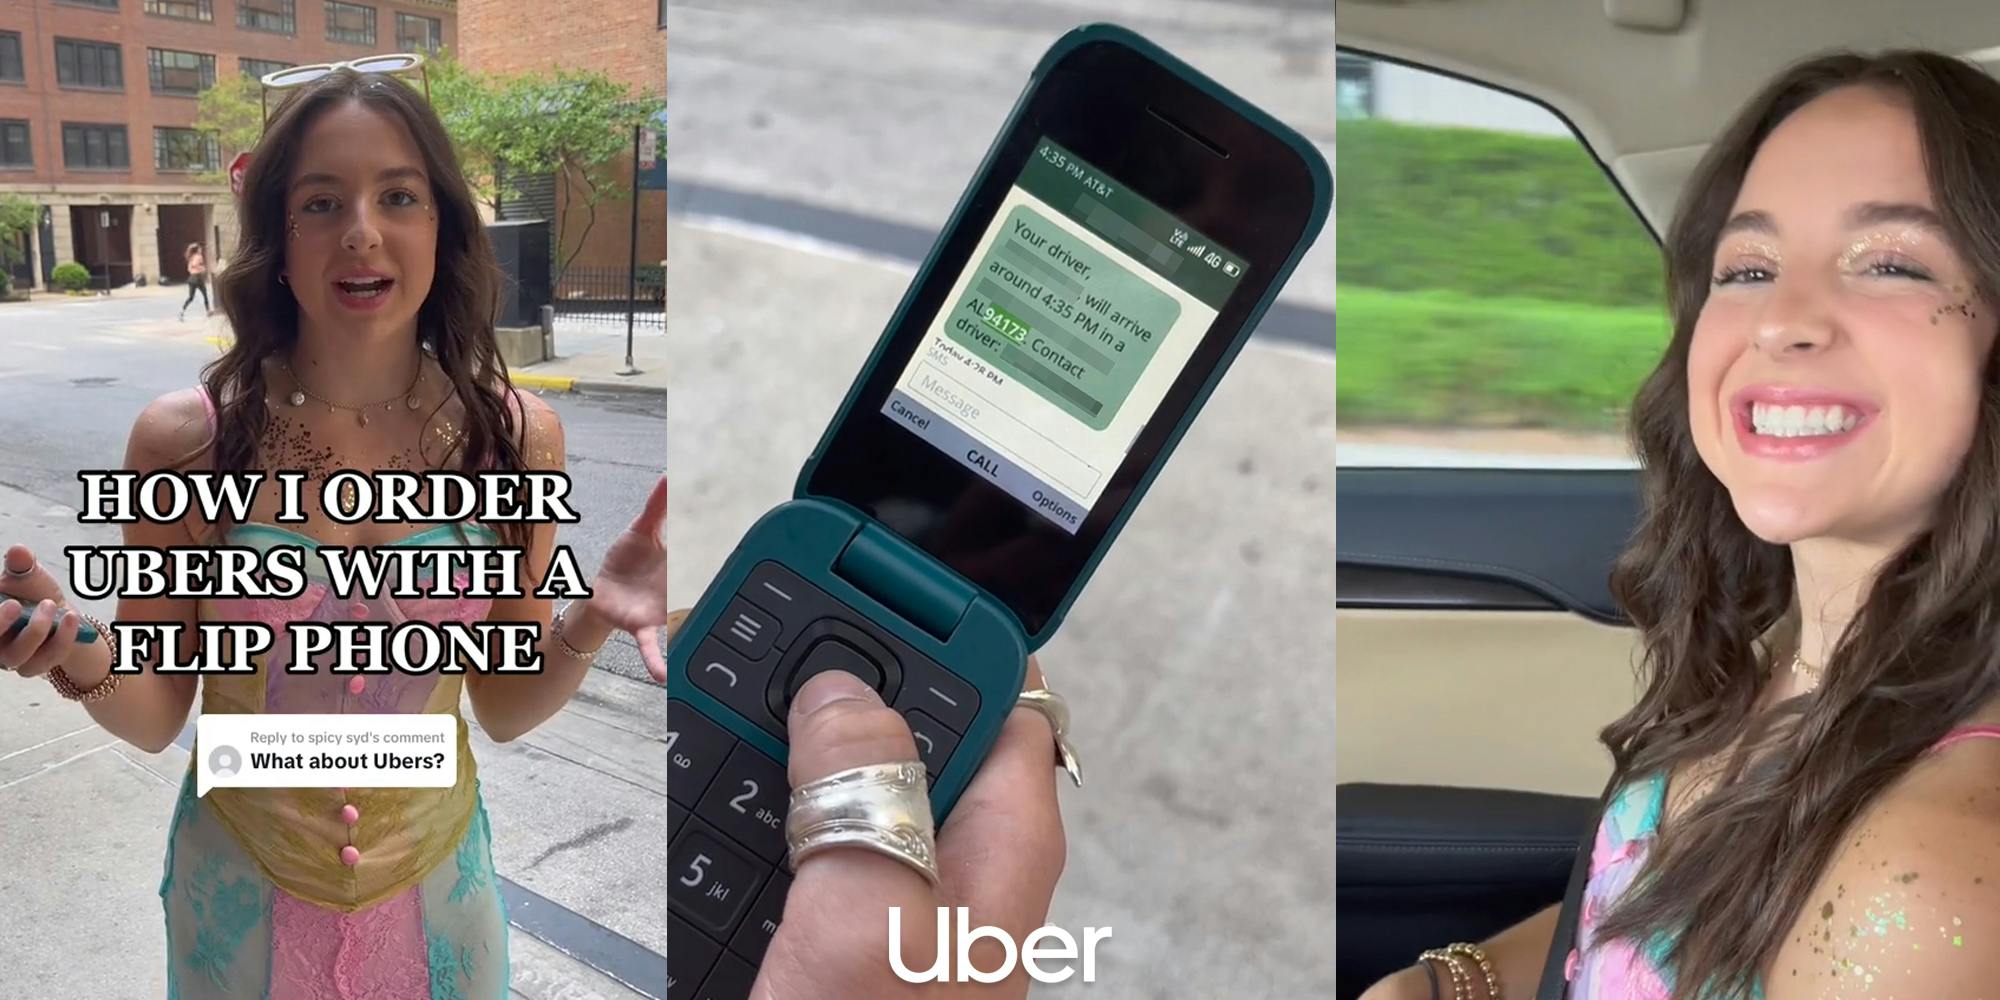 Uber customer speaking with caption "HOW I ORDER UBERS WITH A FLIP PHONE What about Ubers?" (l) woman holding flip phone with Uber message on screen with Uber logo at bottom (c) woman in back seat of Uber happy (r)